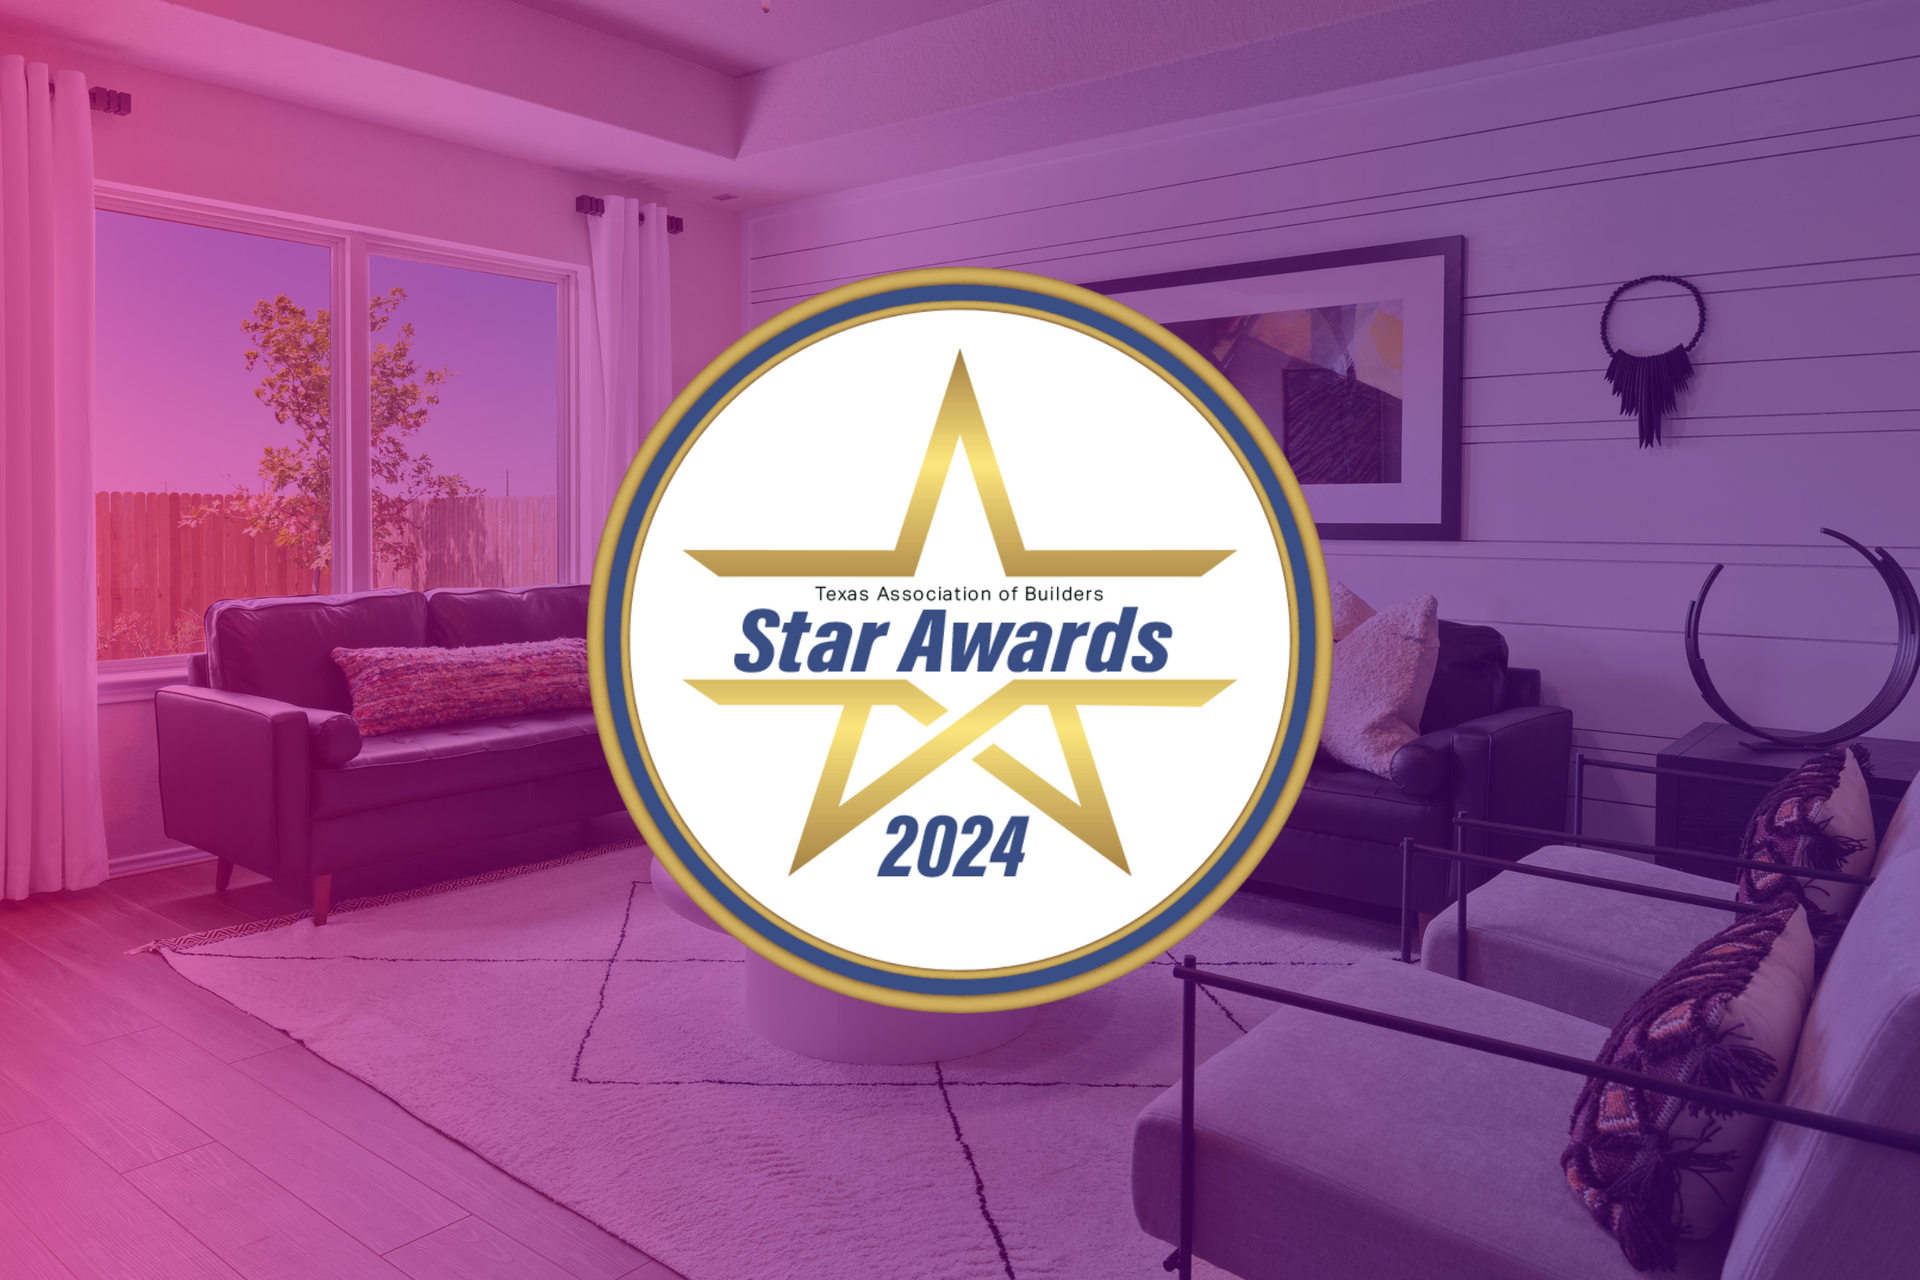 Star Awards logo on purple background with model home interior shown